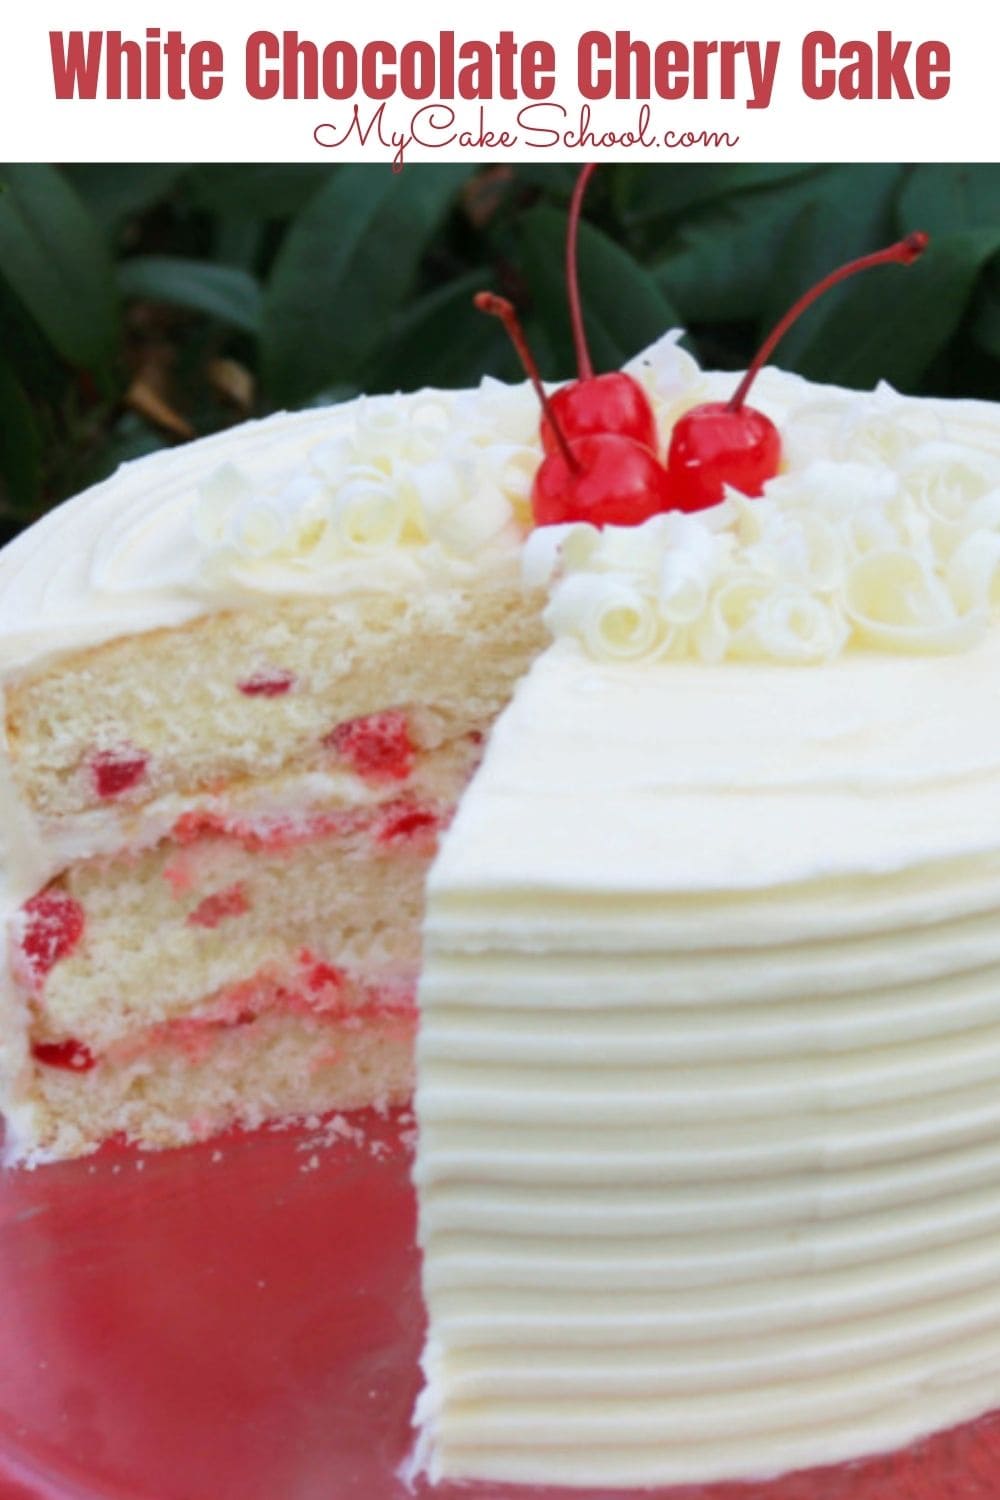 White Chocolate Cherry Cake - So moist and delicious